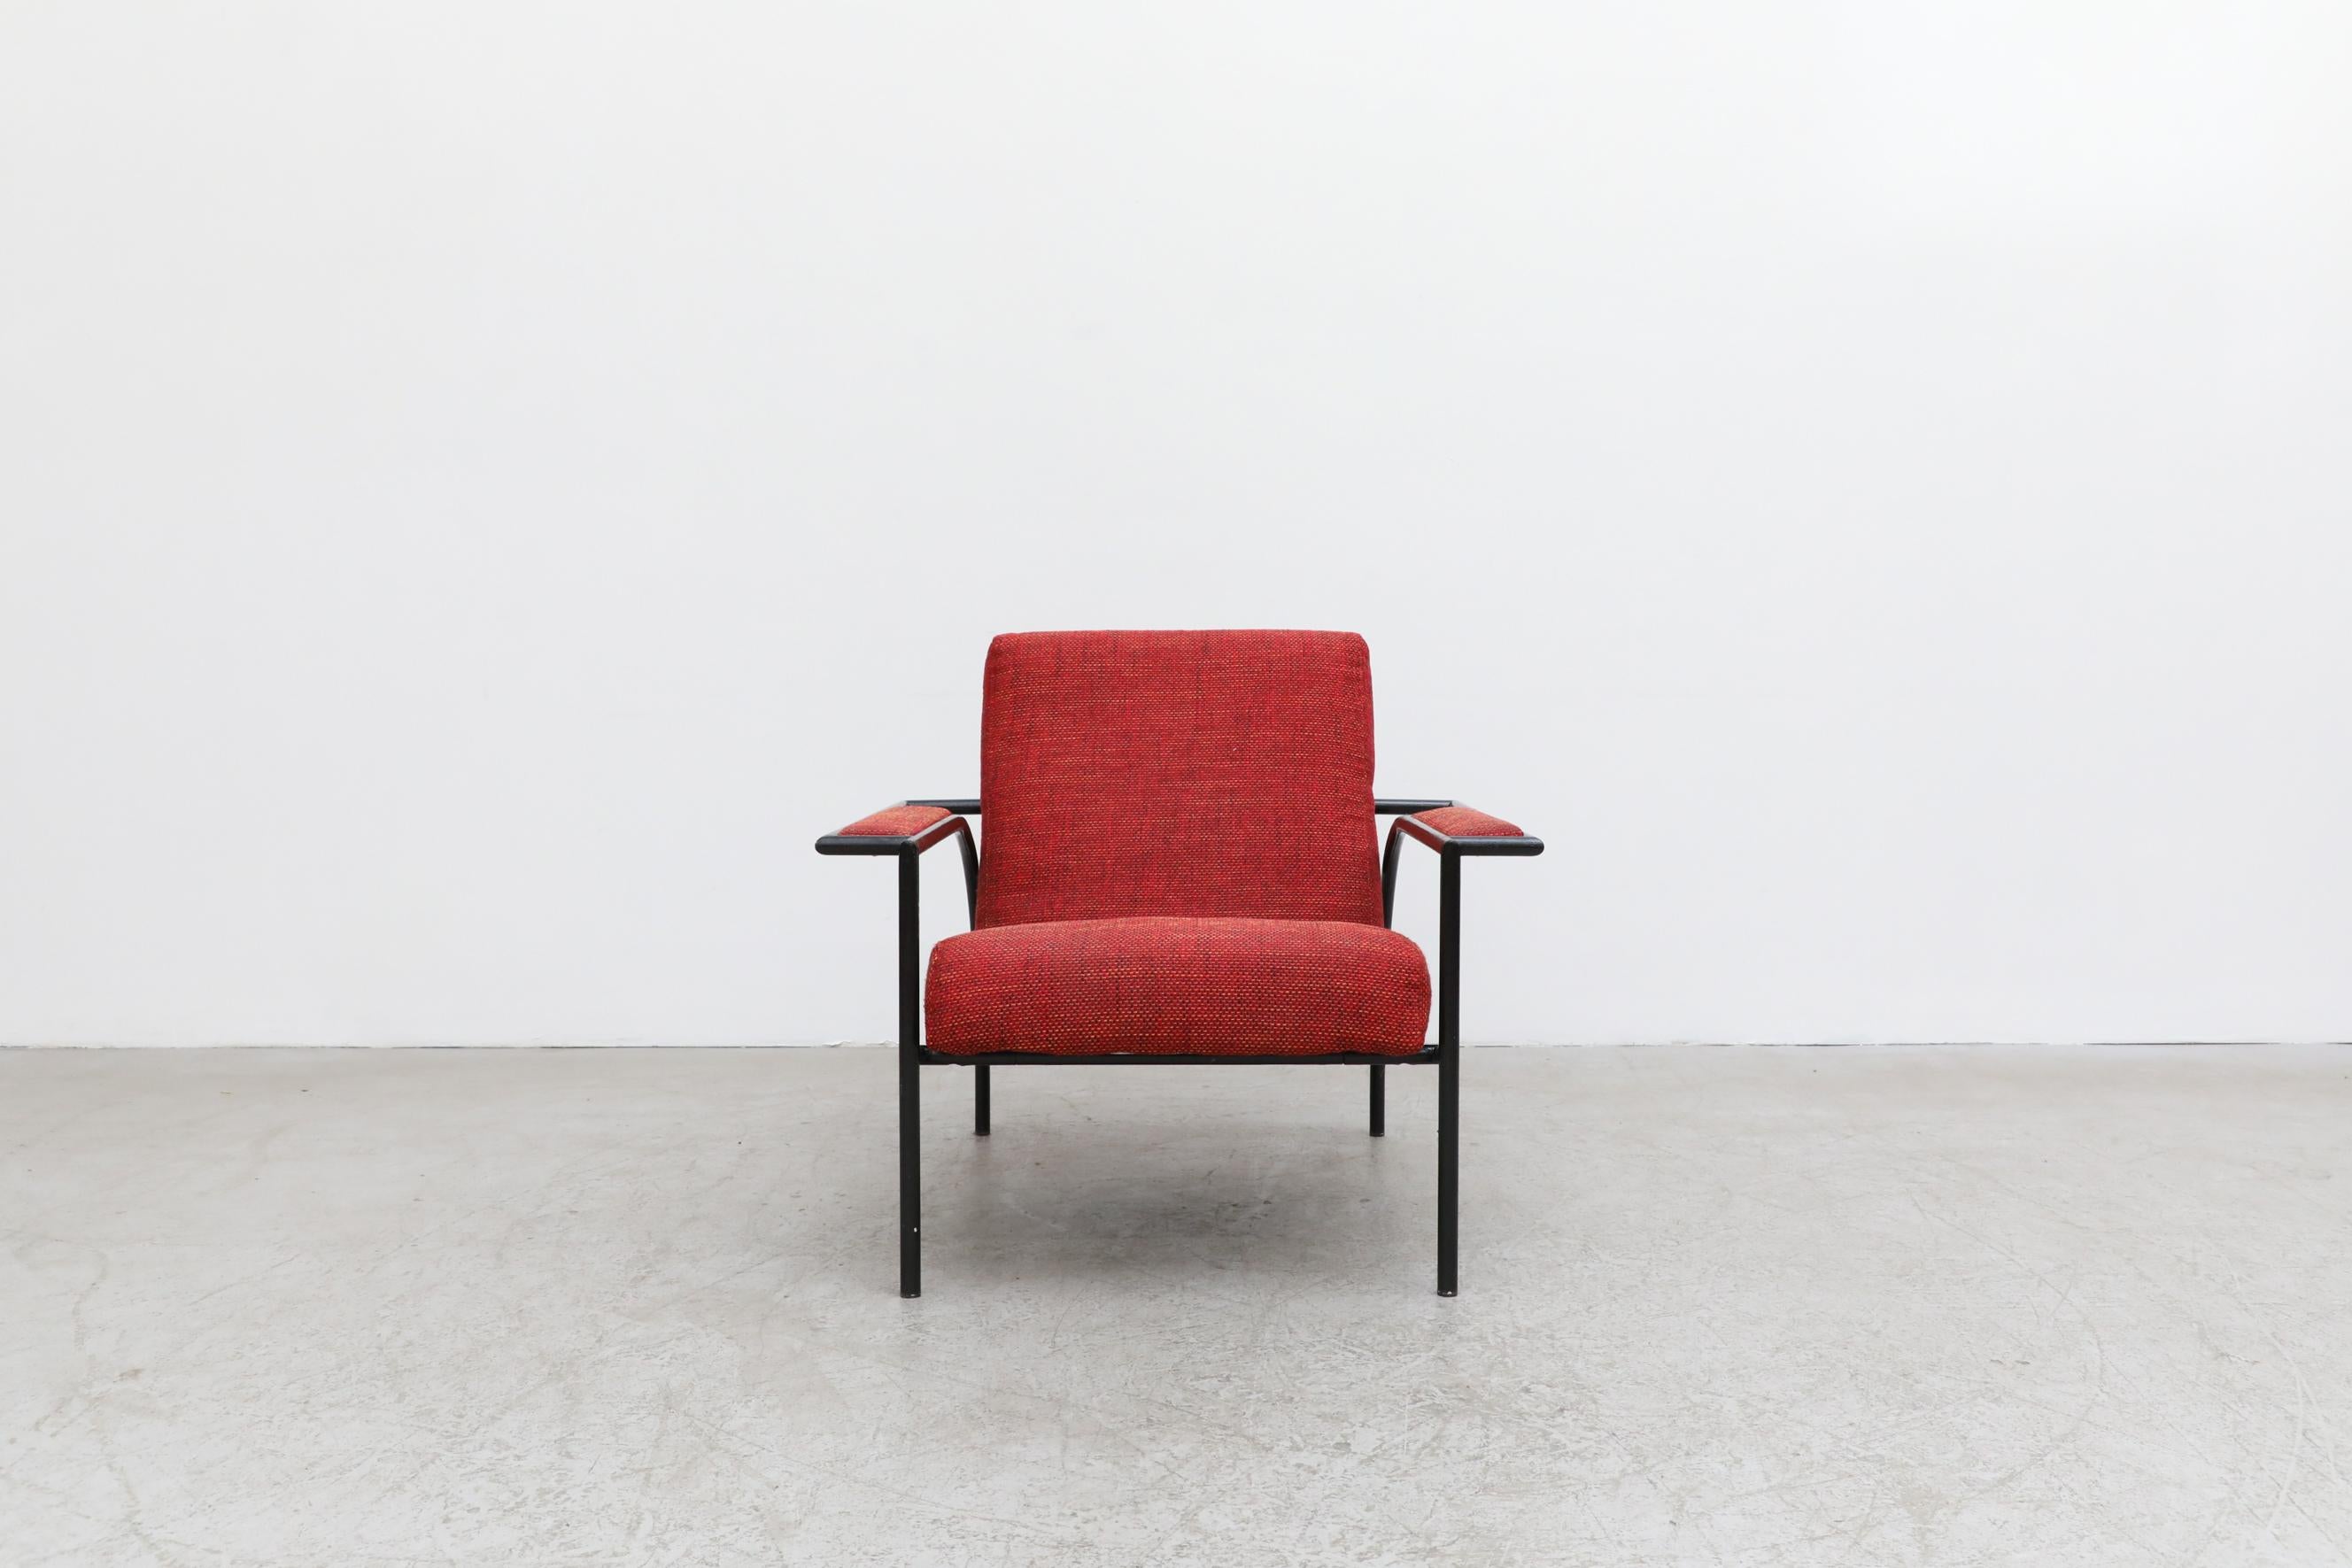 1980's Gerard Vollenbrock Lounge Chair for Gelderland with Original Red Upholstery and Black Enameled Frame. In original condition with some visible wear on frame, consistent with its age and use.